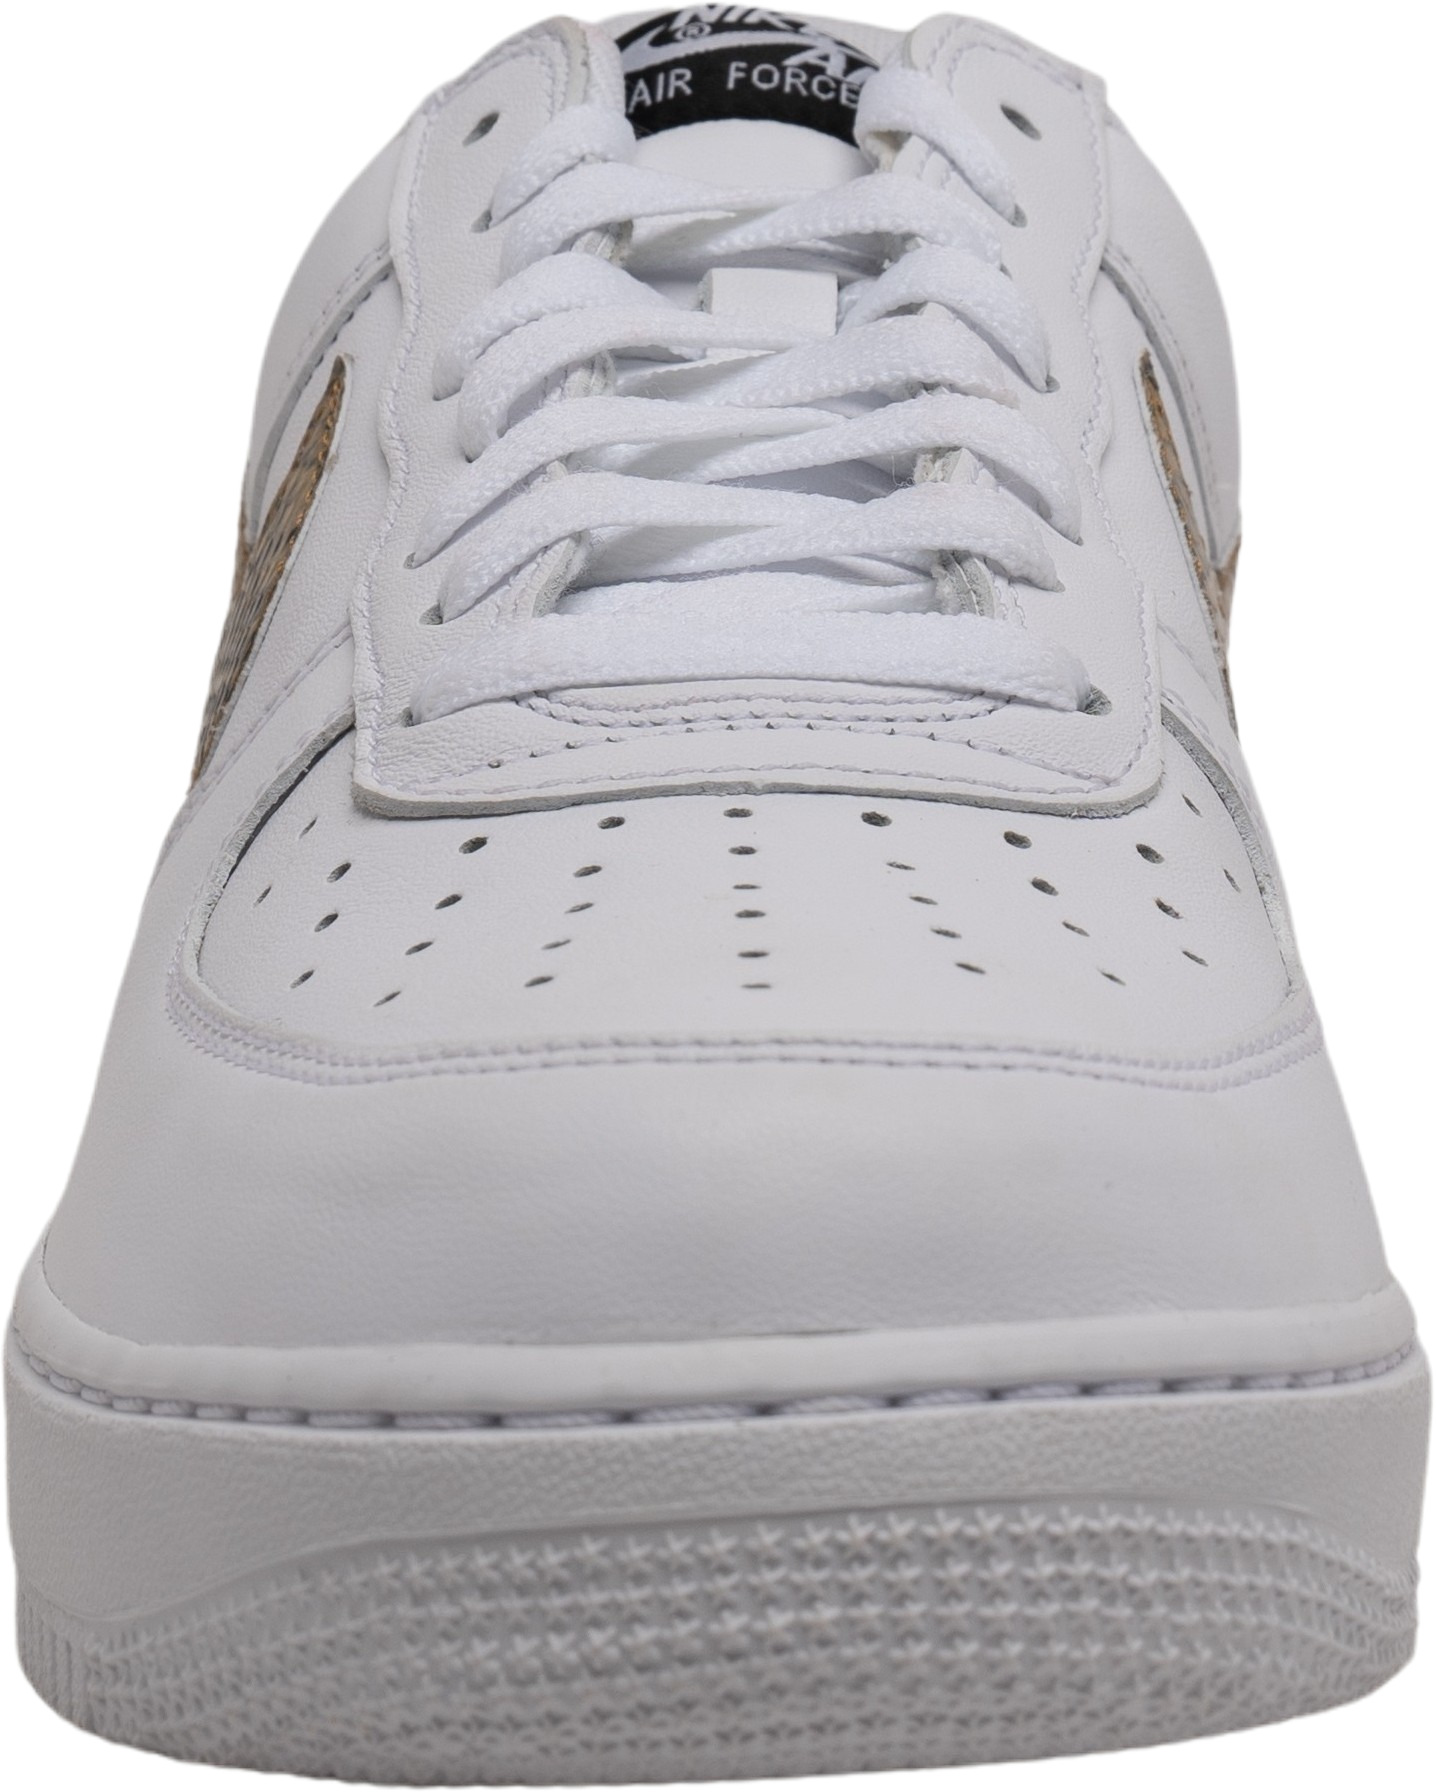 Nike Air Force 1 Low Retro Ivory Snake 2019 for Sale 